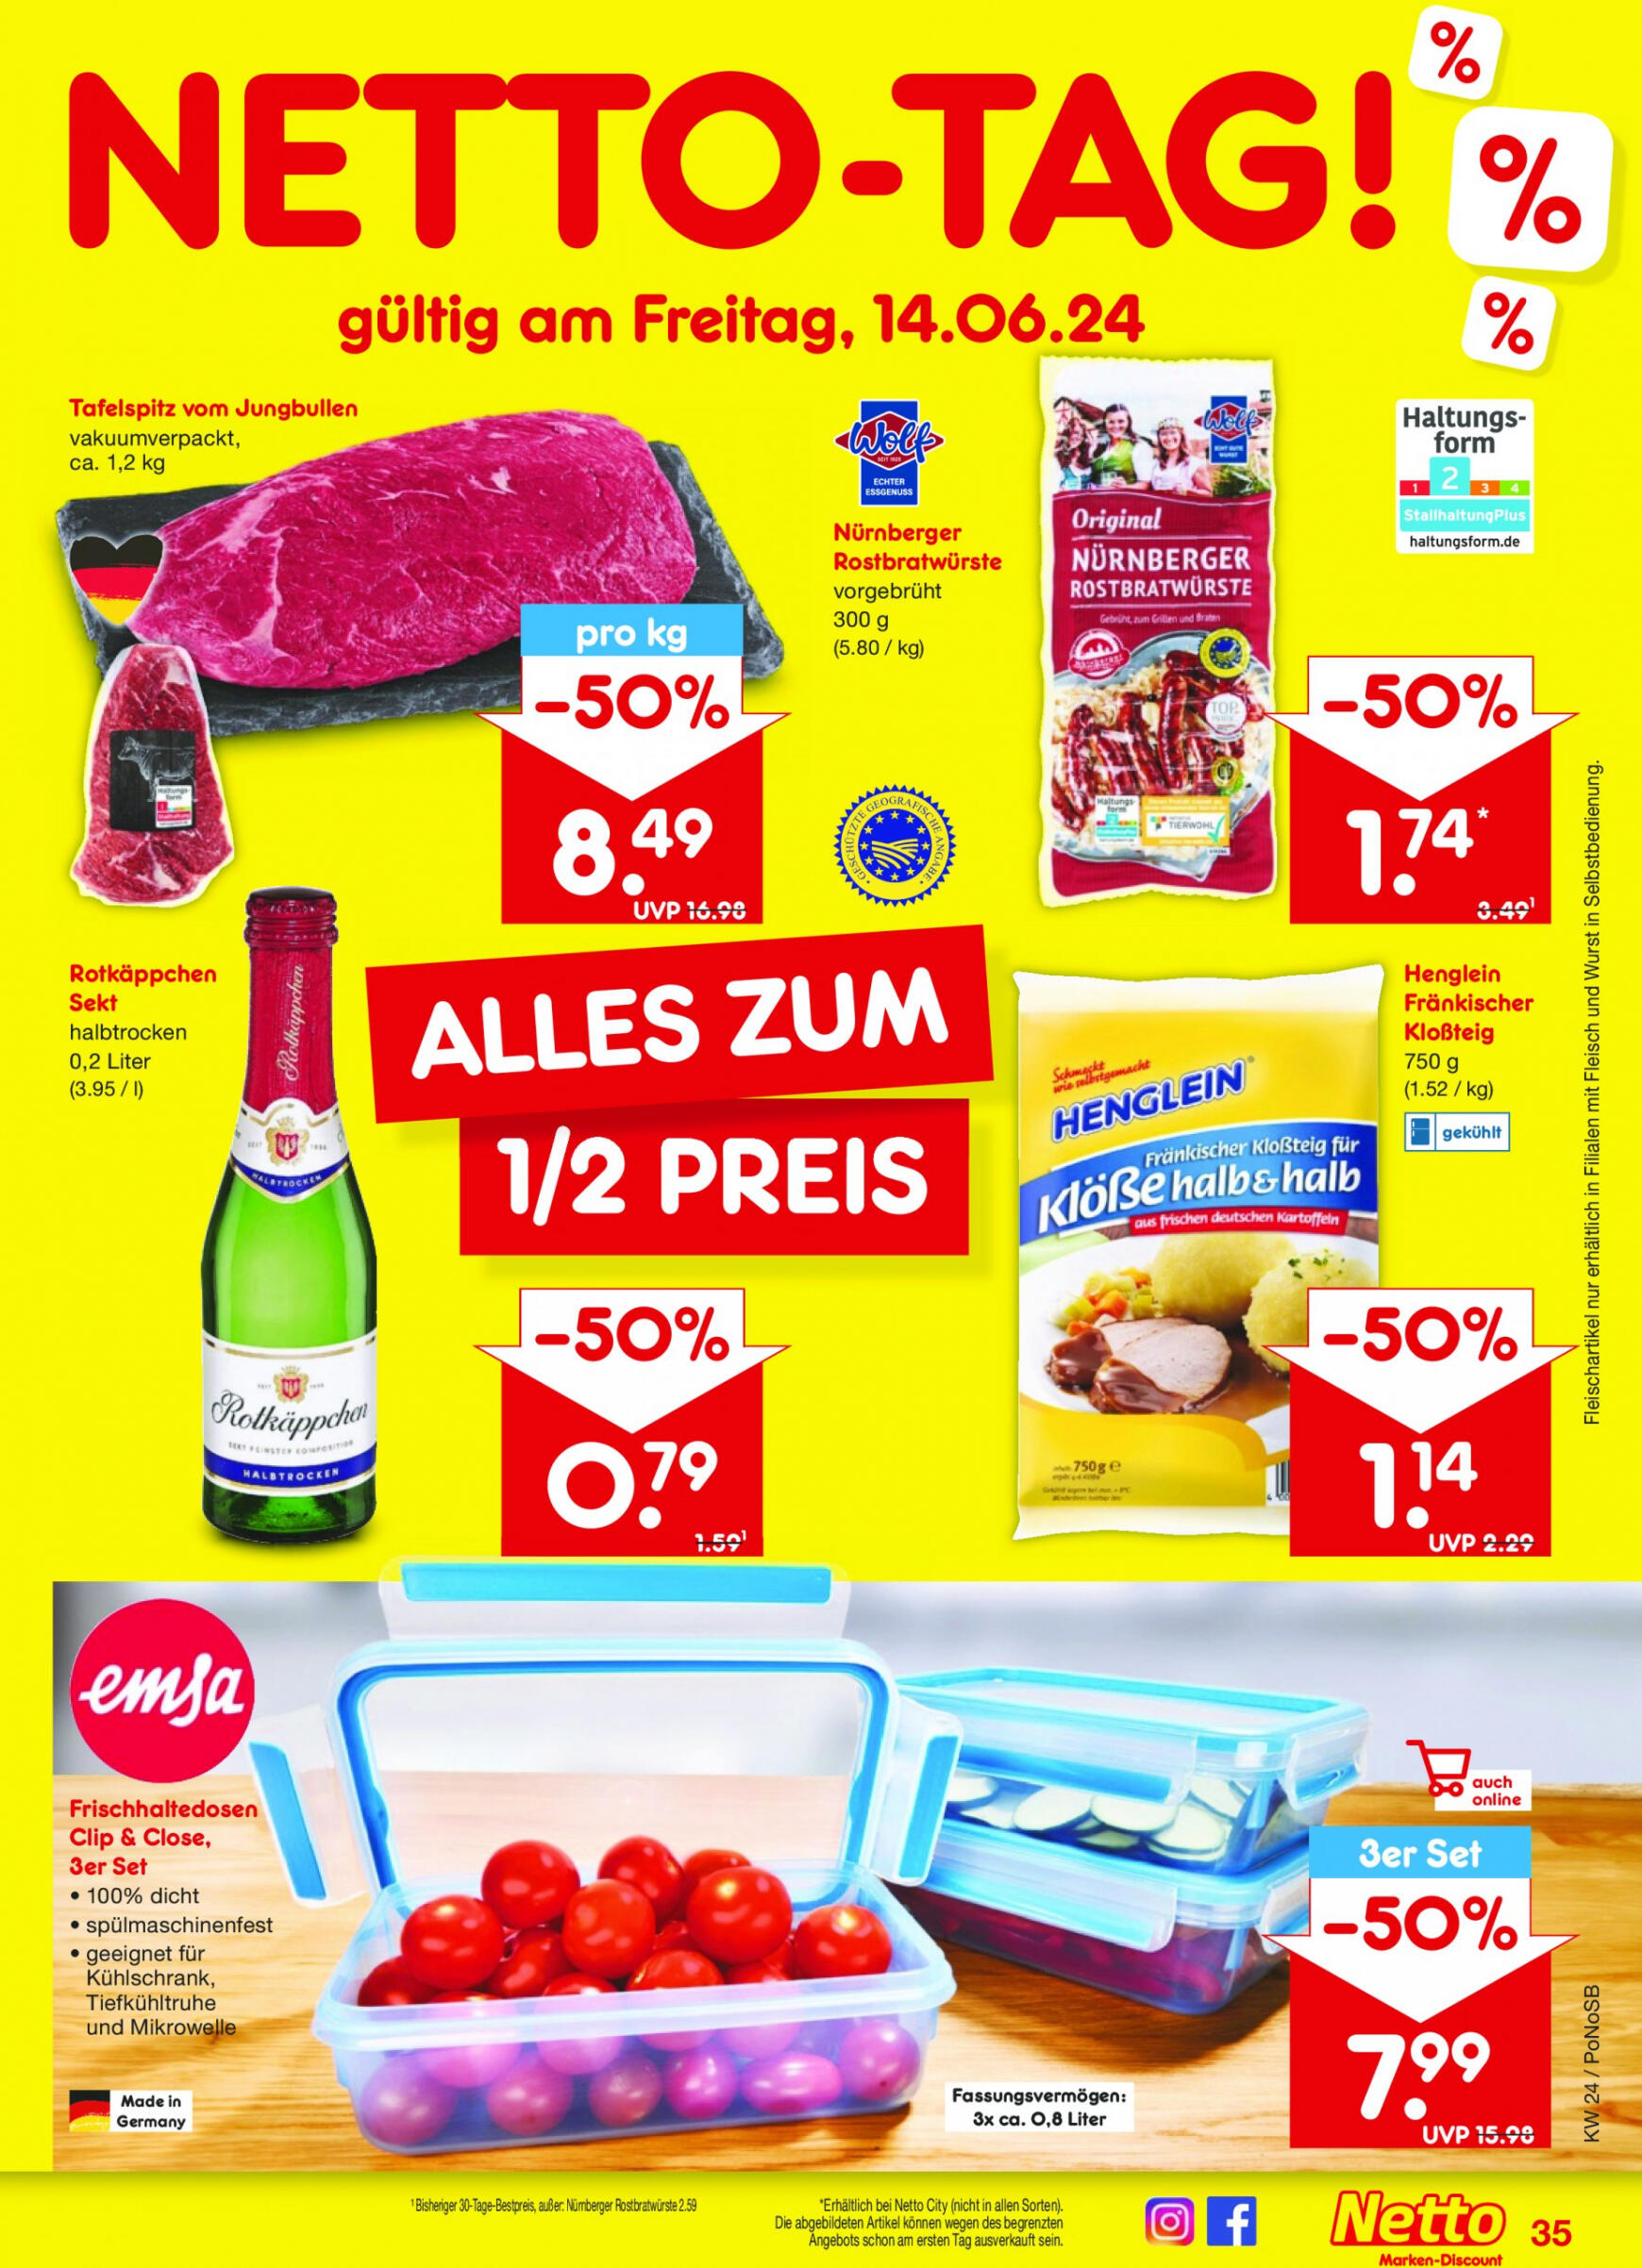 netto - Flyer Netto aktuell 10.06. - 15.06. - page: 51